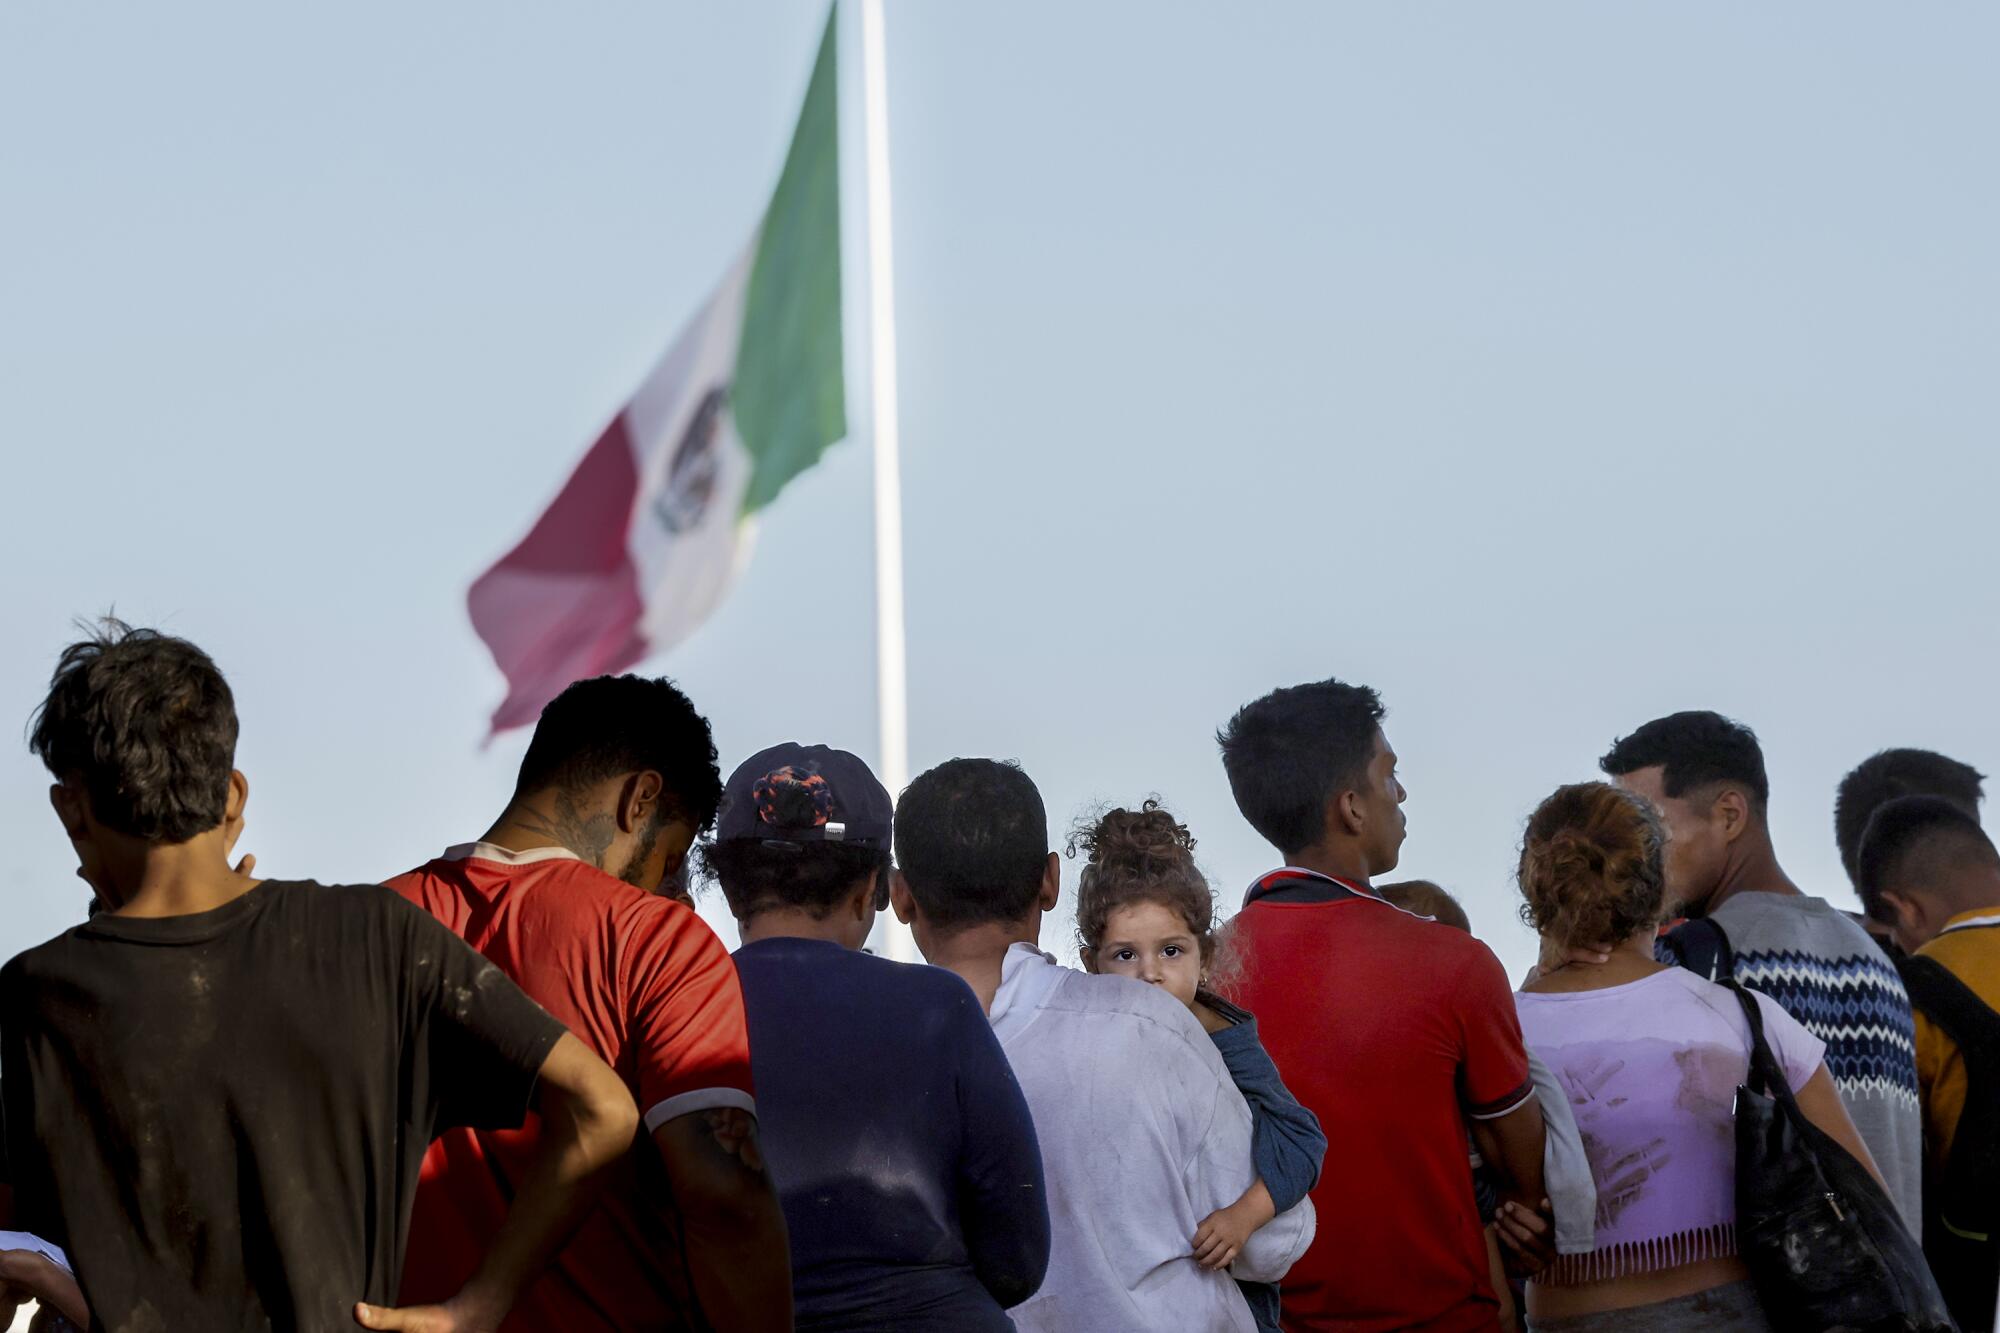 People who crossed the U.S.-Mexico border wait in a line near a flag.